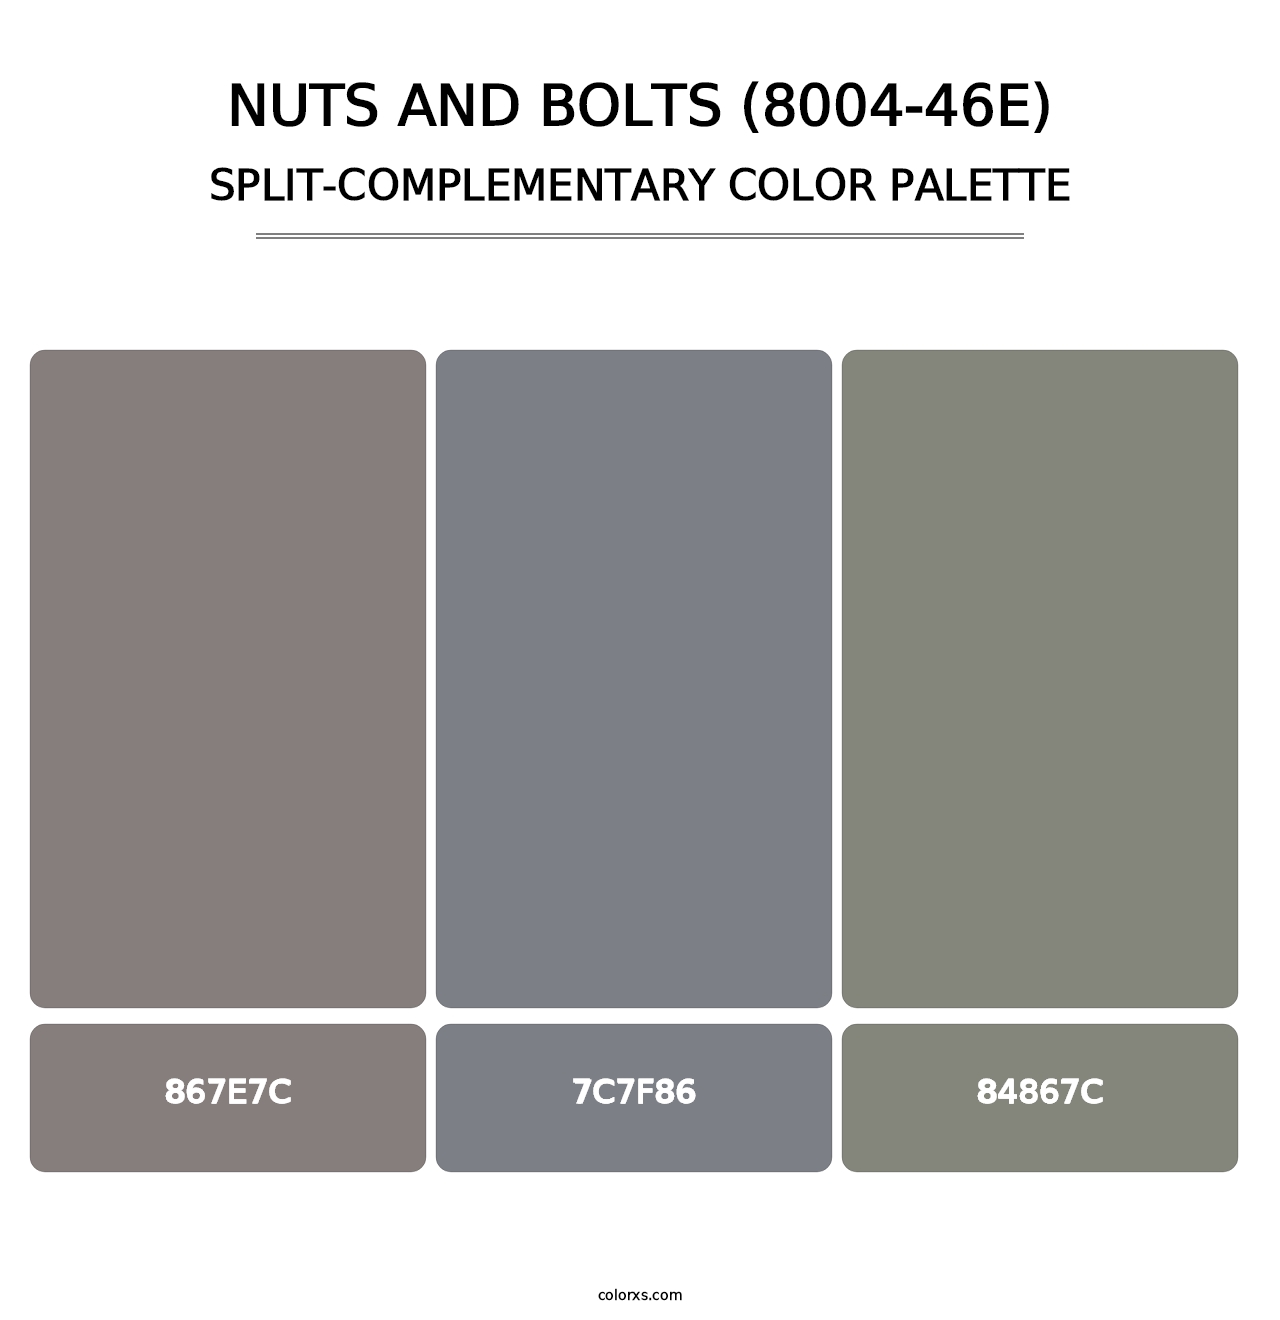 Nuts and Bolts (8004-46E) - Split-Complementary Color Palette